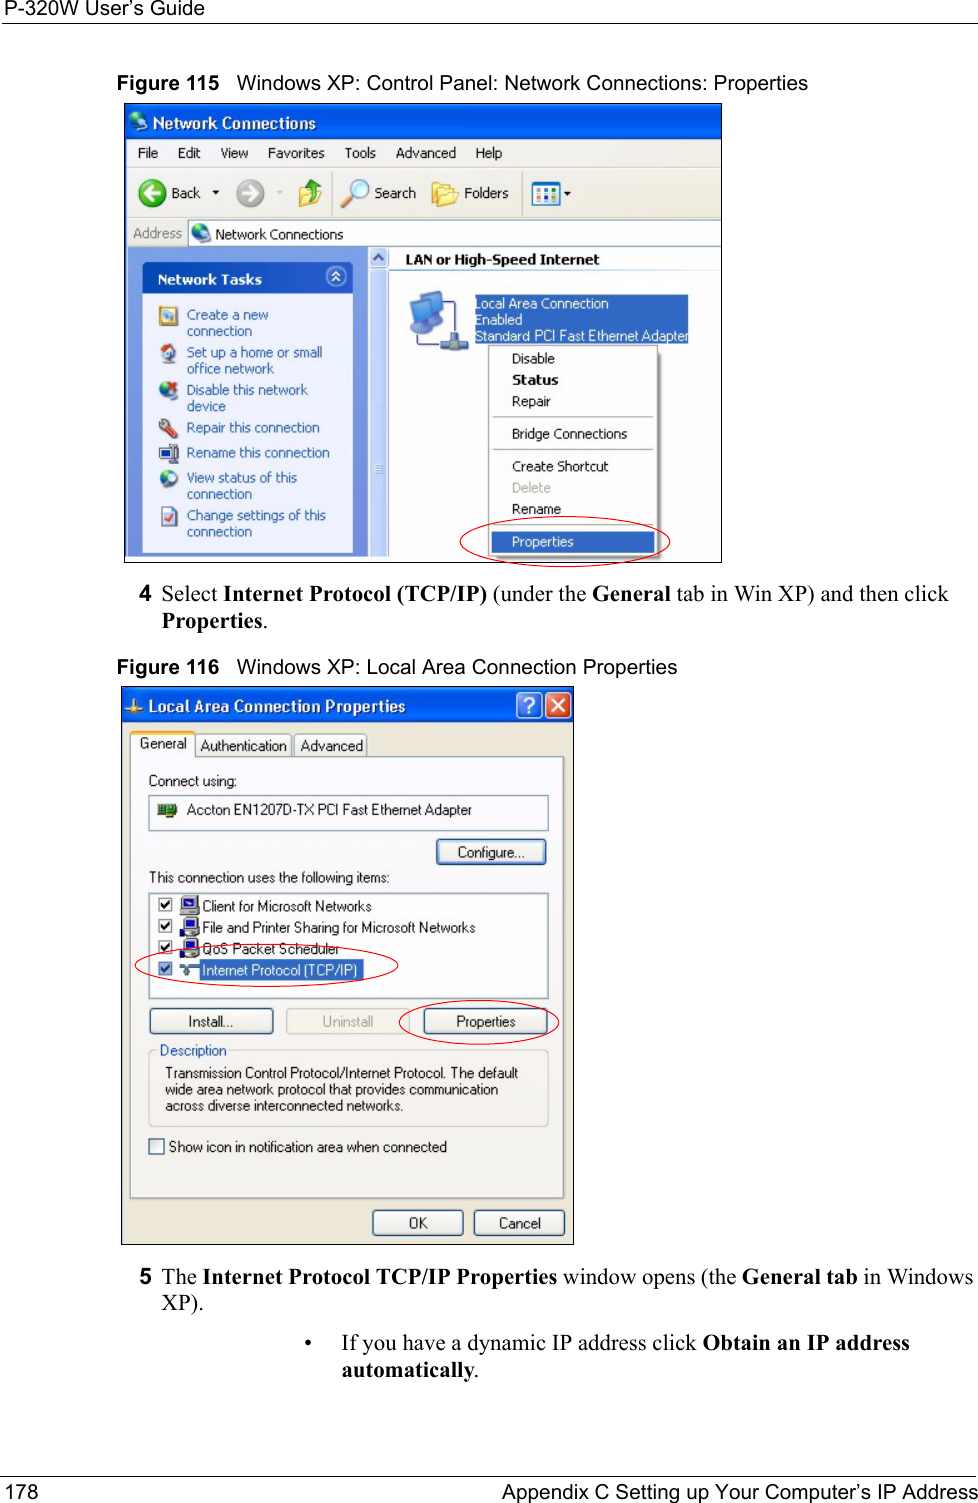 P-320W User’s Guide178  Appendix C Setting up Your Computer’s IP AddressFigure 115   Windows XP: Control Panel: Network Connections: Properties4Select Internet Protocol (TCP/IP) (under the General tab in Win XP) and then click Properties.Figure 116   Windows XP: Local Area Connection Properties5The Internet Protocol TCP/IP Properties window opens (the General tab in Windows XP).• If you have a dynamic IP address click Obtain an IP address automatically.